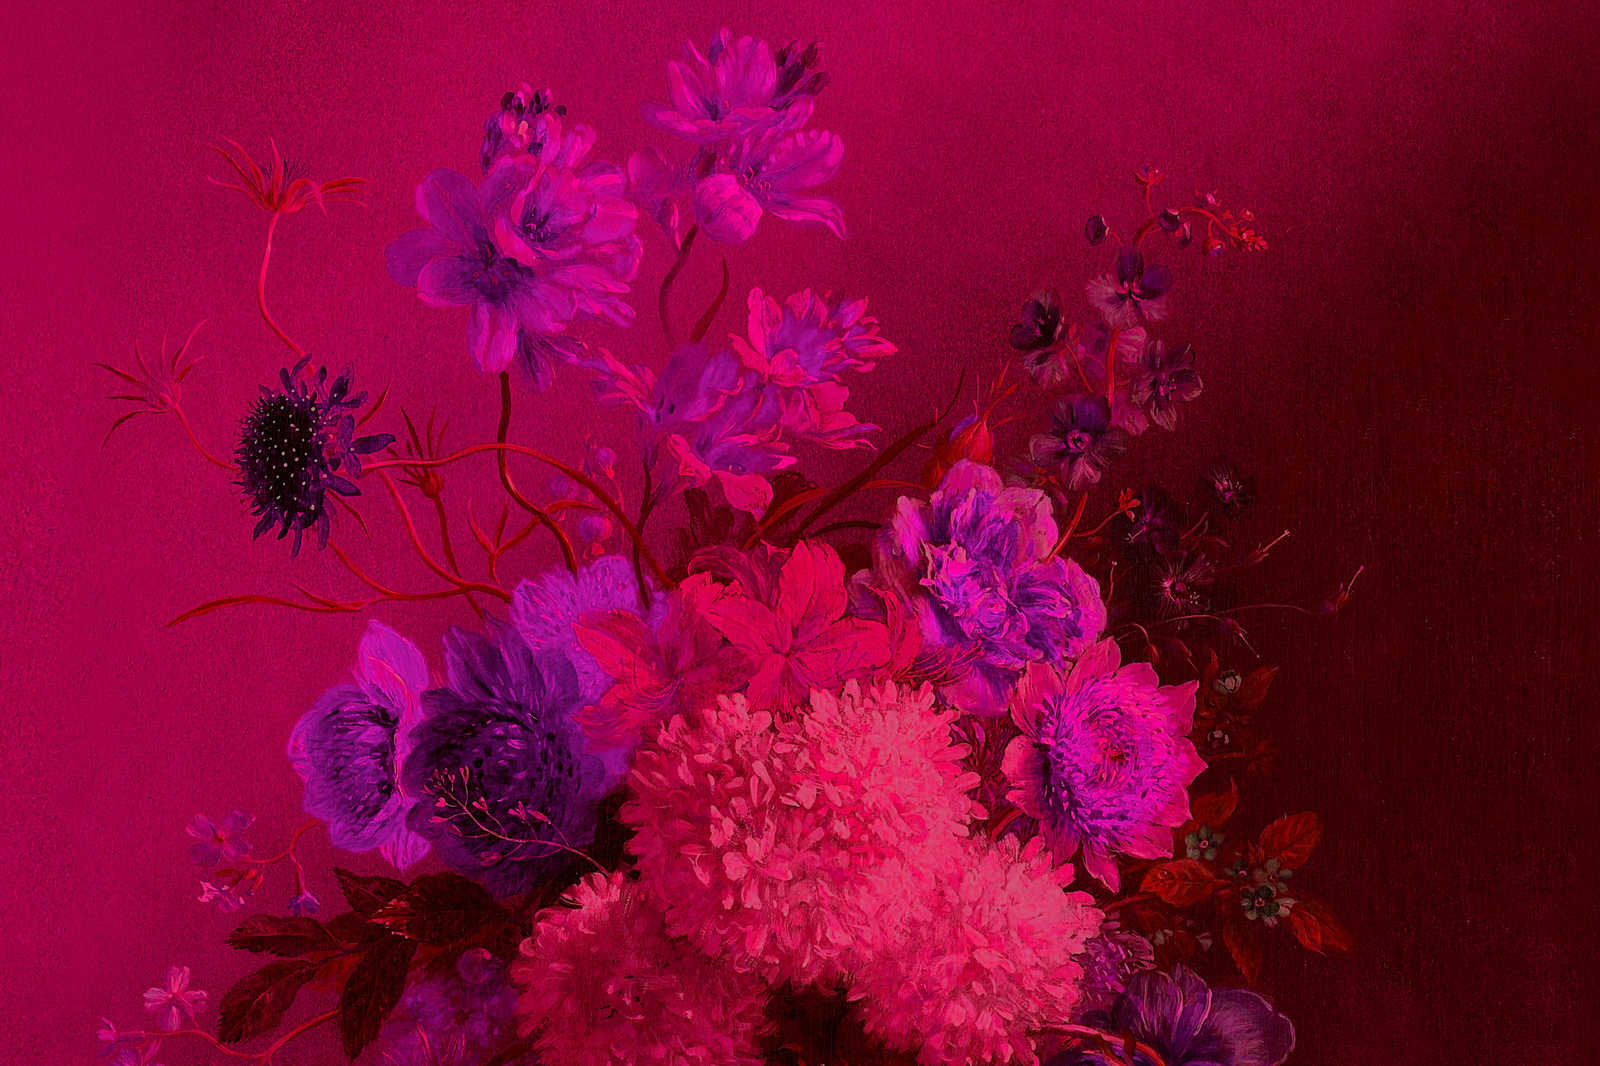             Neon Canvas Painting with Flowers Still Life | bouquet Vibran 2 - 0.90 m x 0.60 m
        